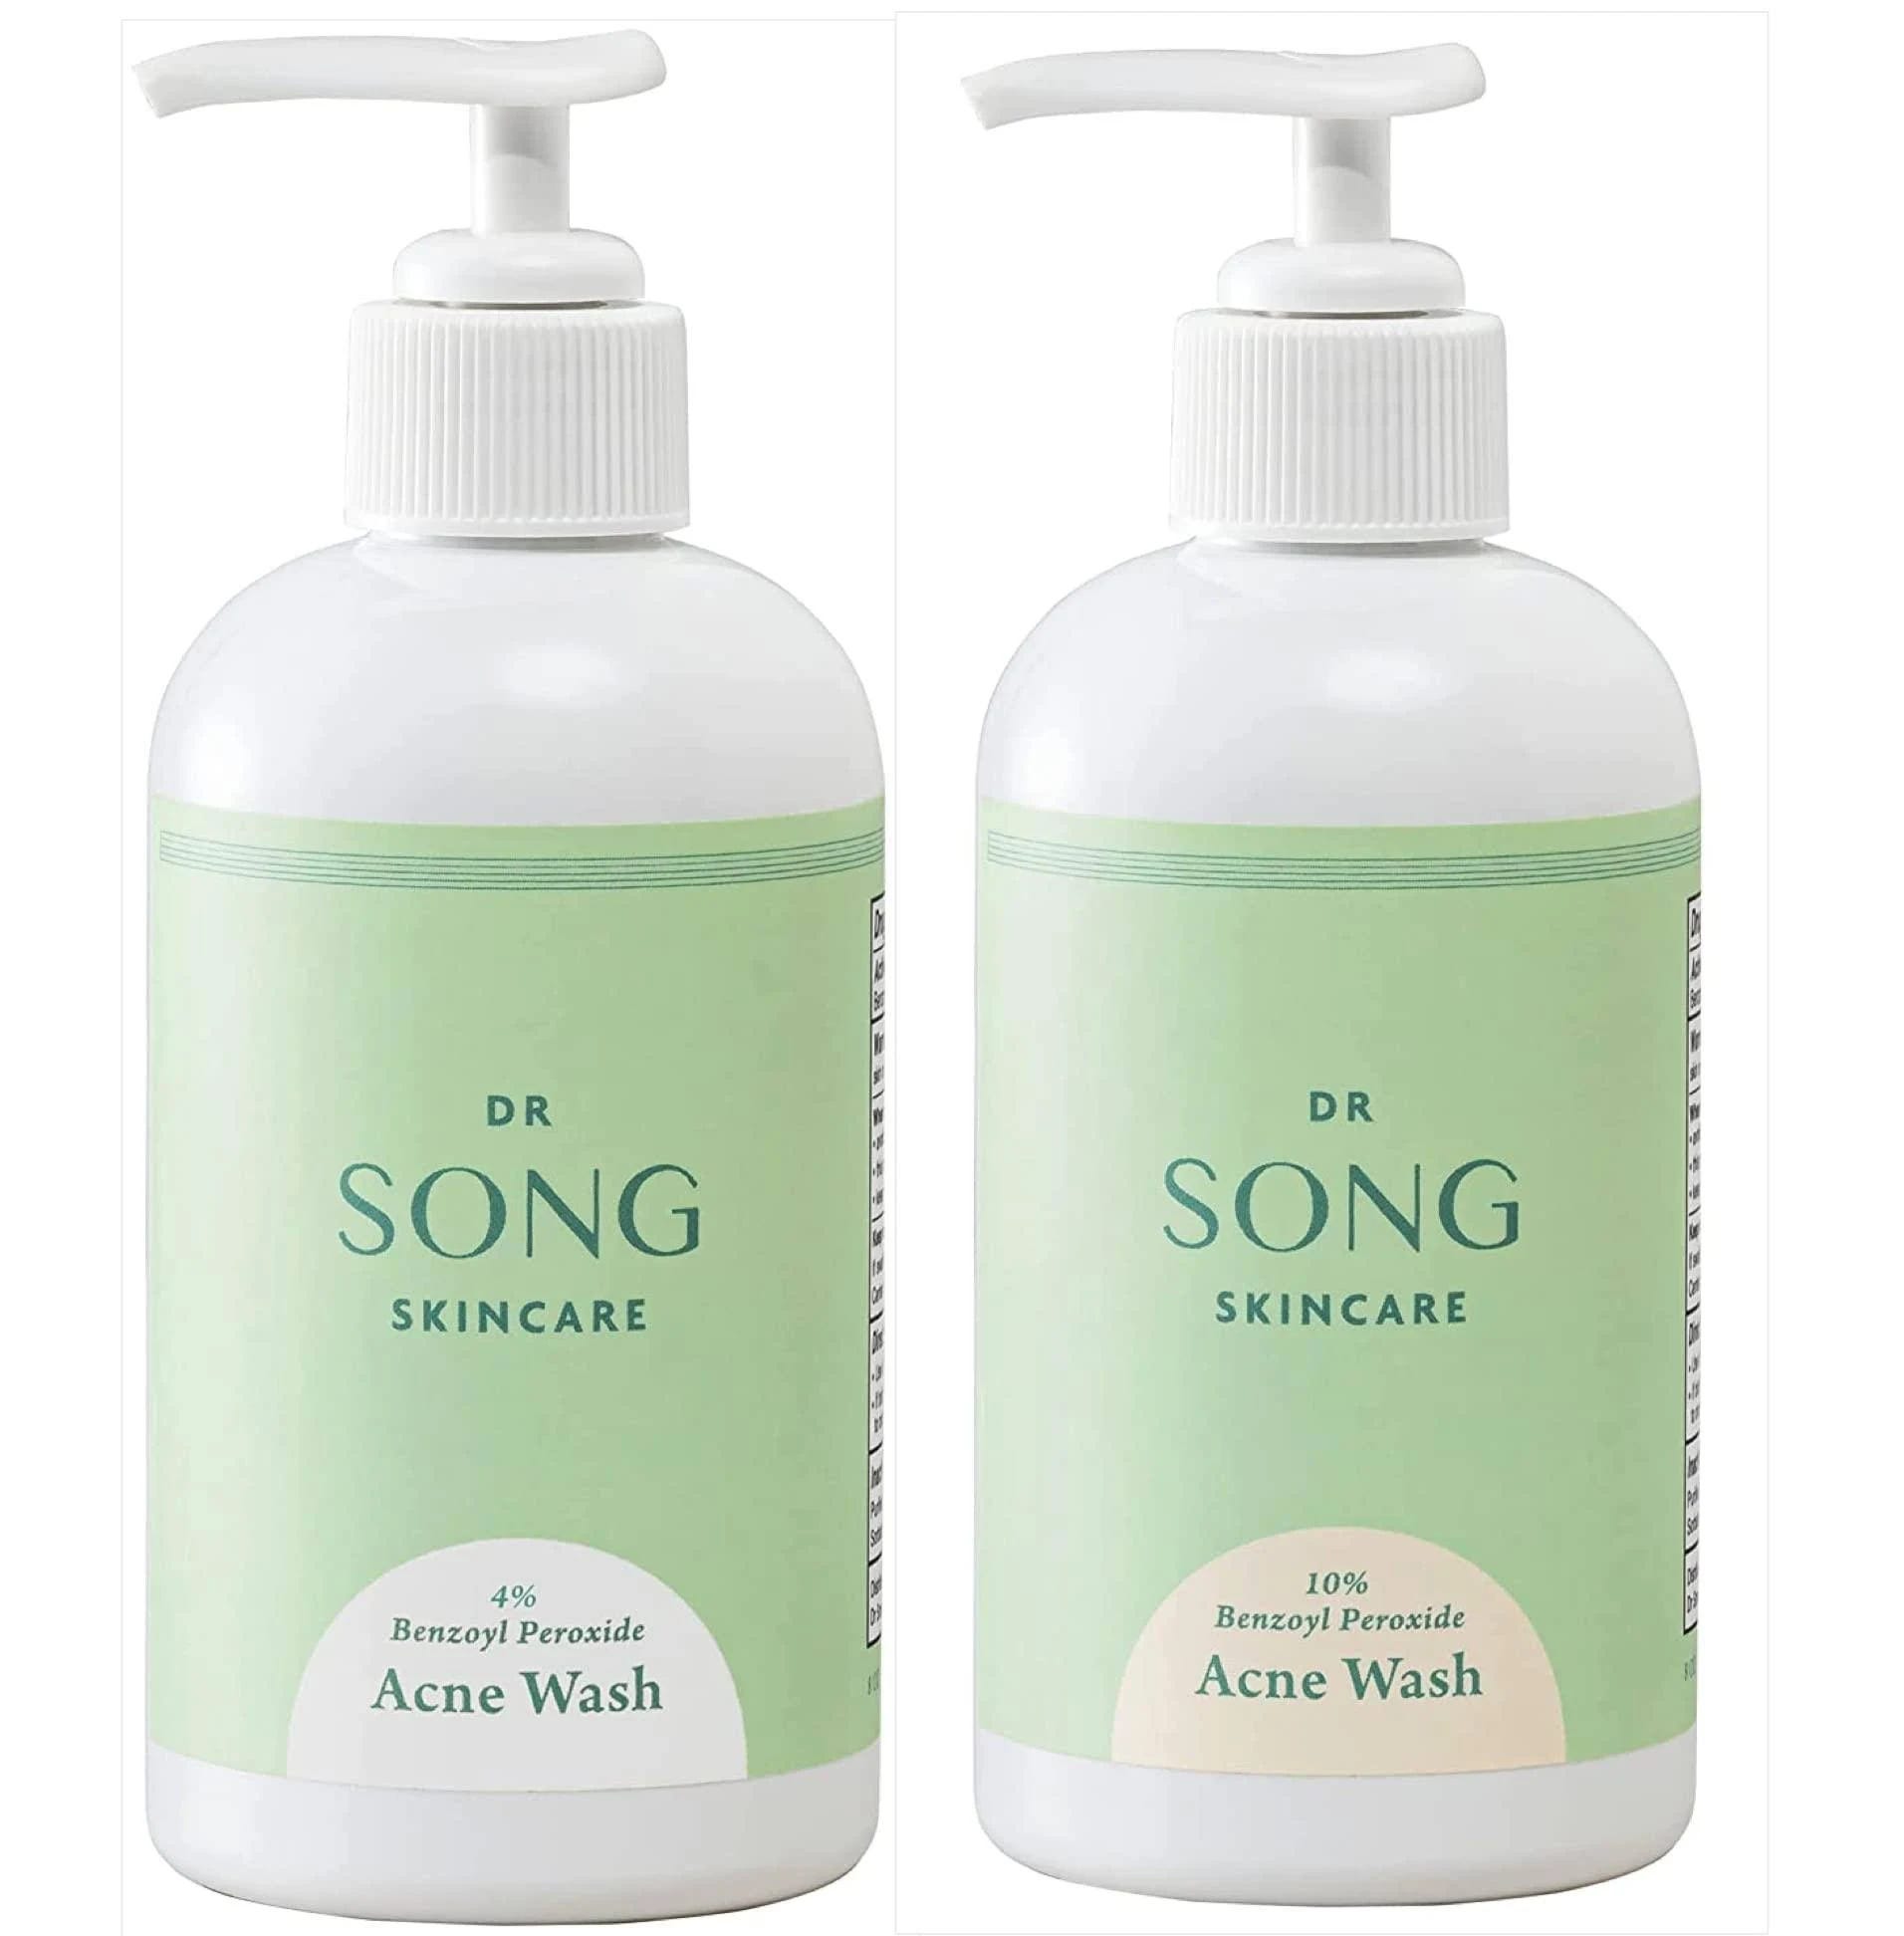 American-Made Benzoyl Peroxide Acne Wash 4% and 10% Intro Kit | Image